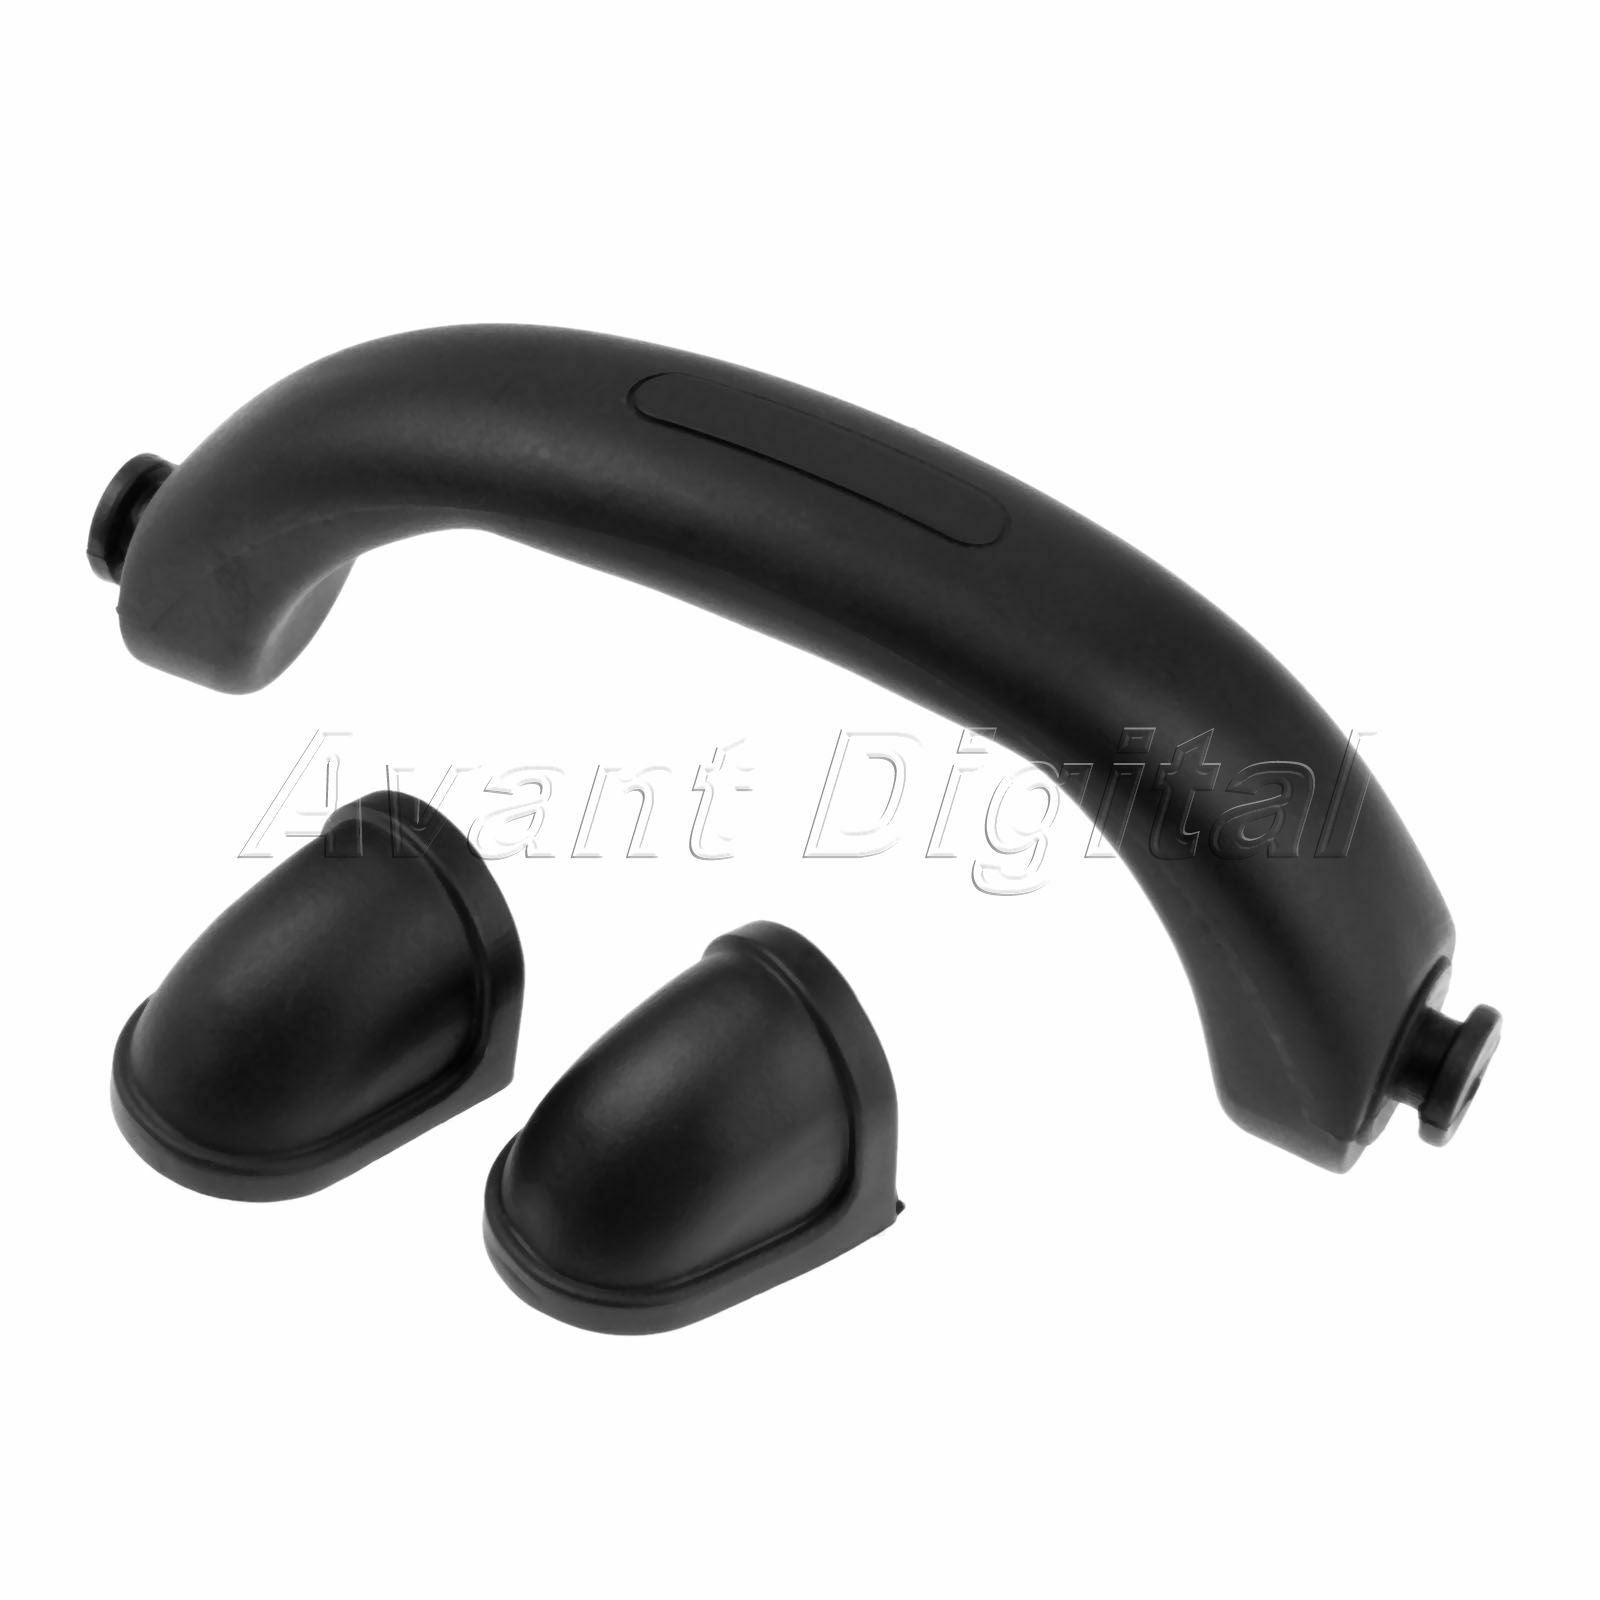 Plastic Black Travelling Suitcase Luggage Case Handle Pull Grip Replacement 1pc